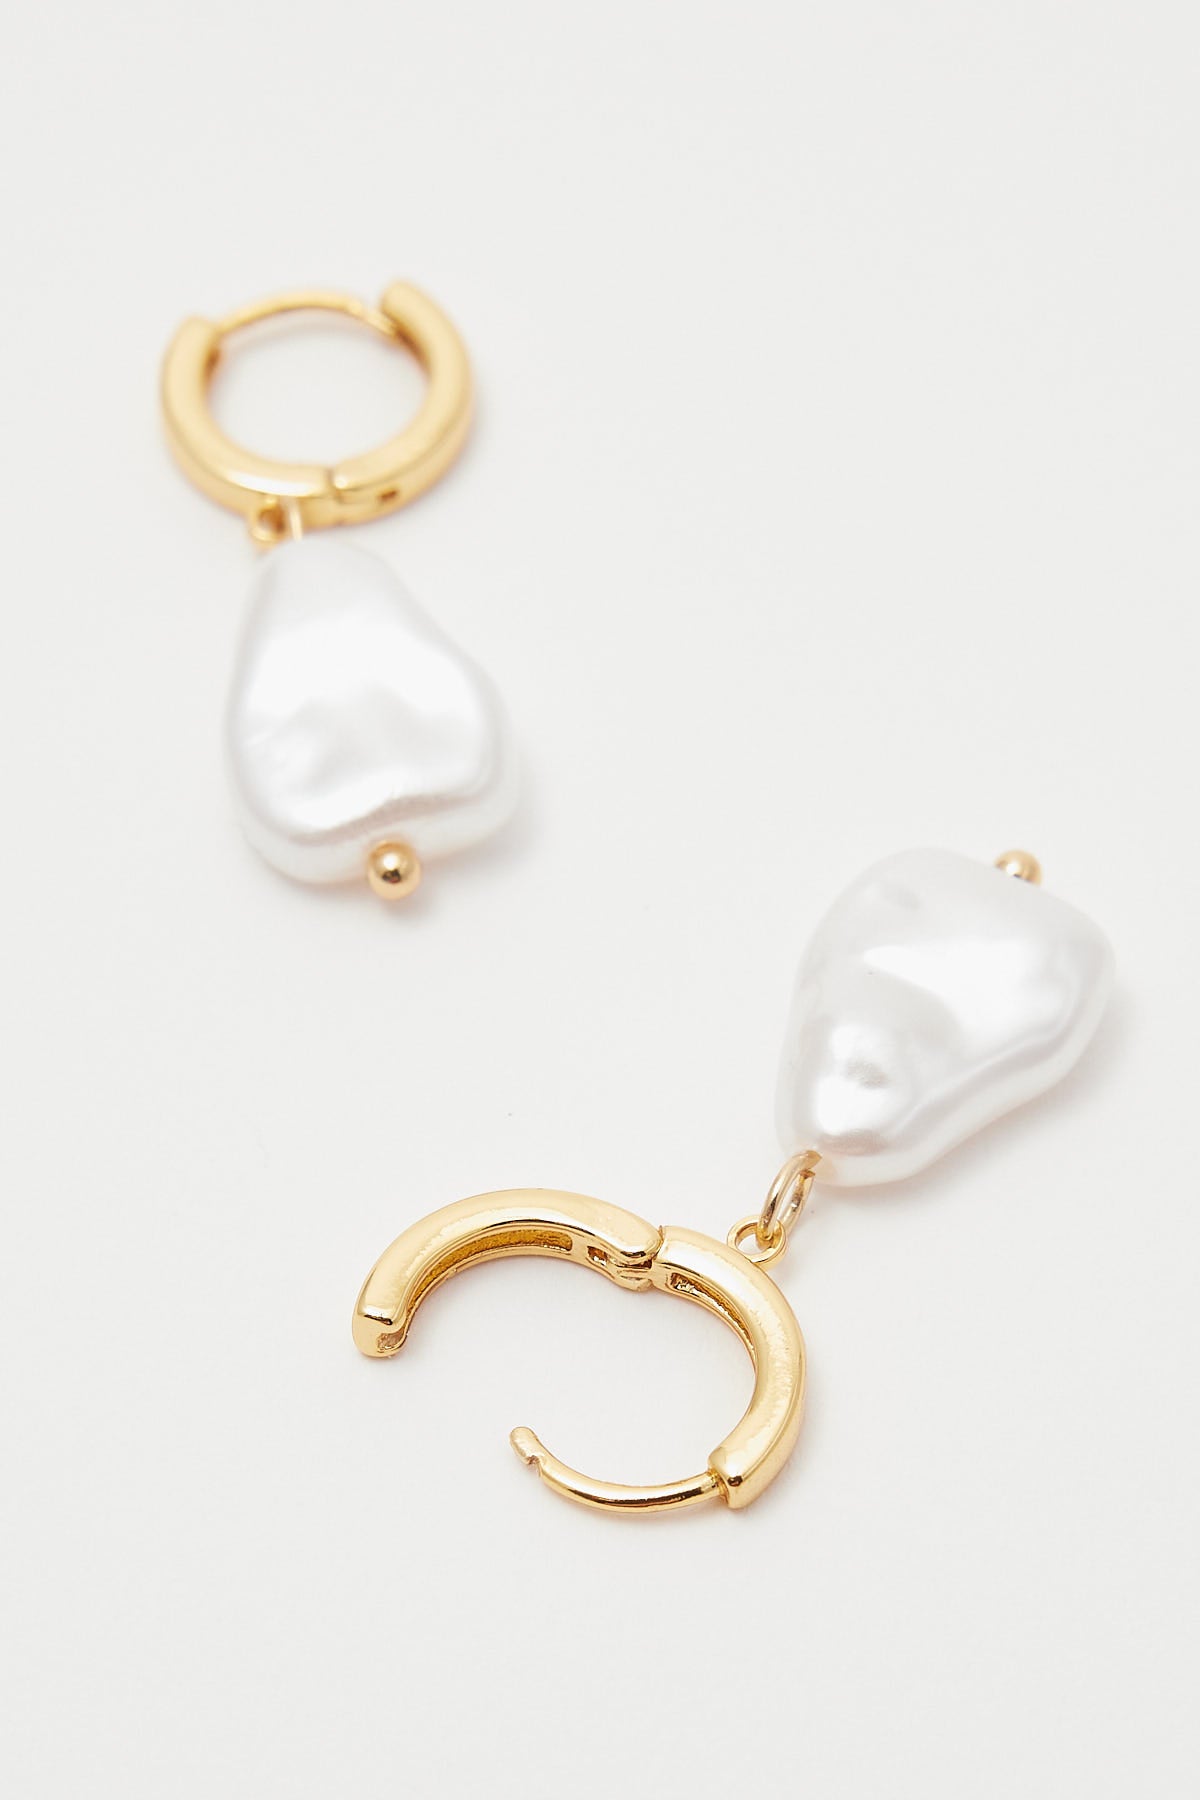 Perfect Stranger Bonnie Pearl Drop Earrings 18K Gold Plated Gold